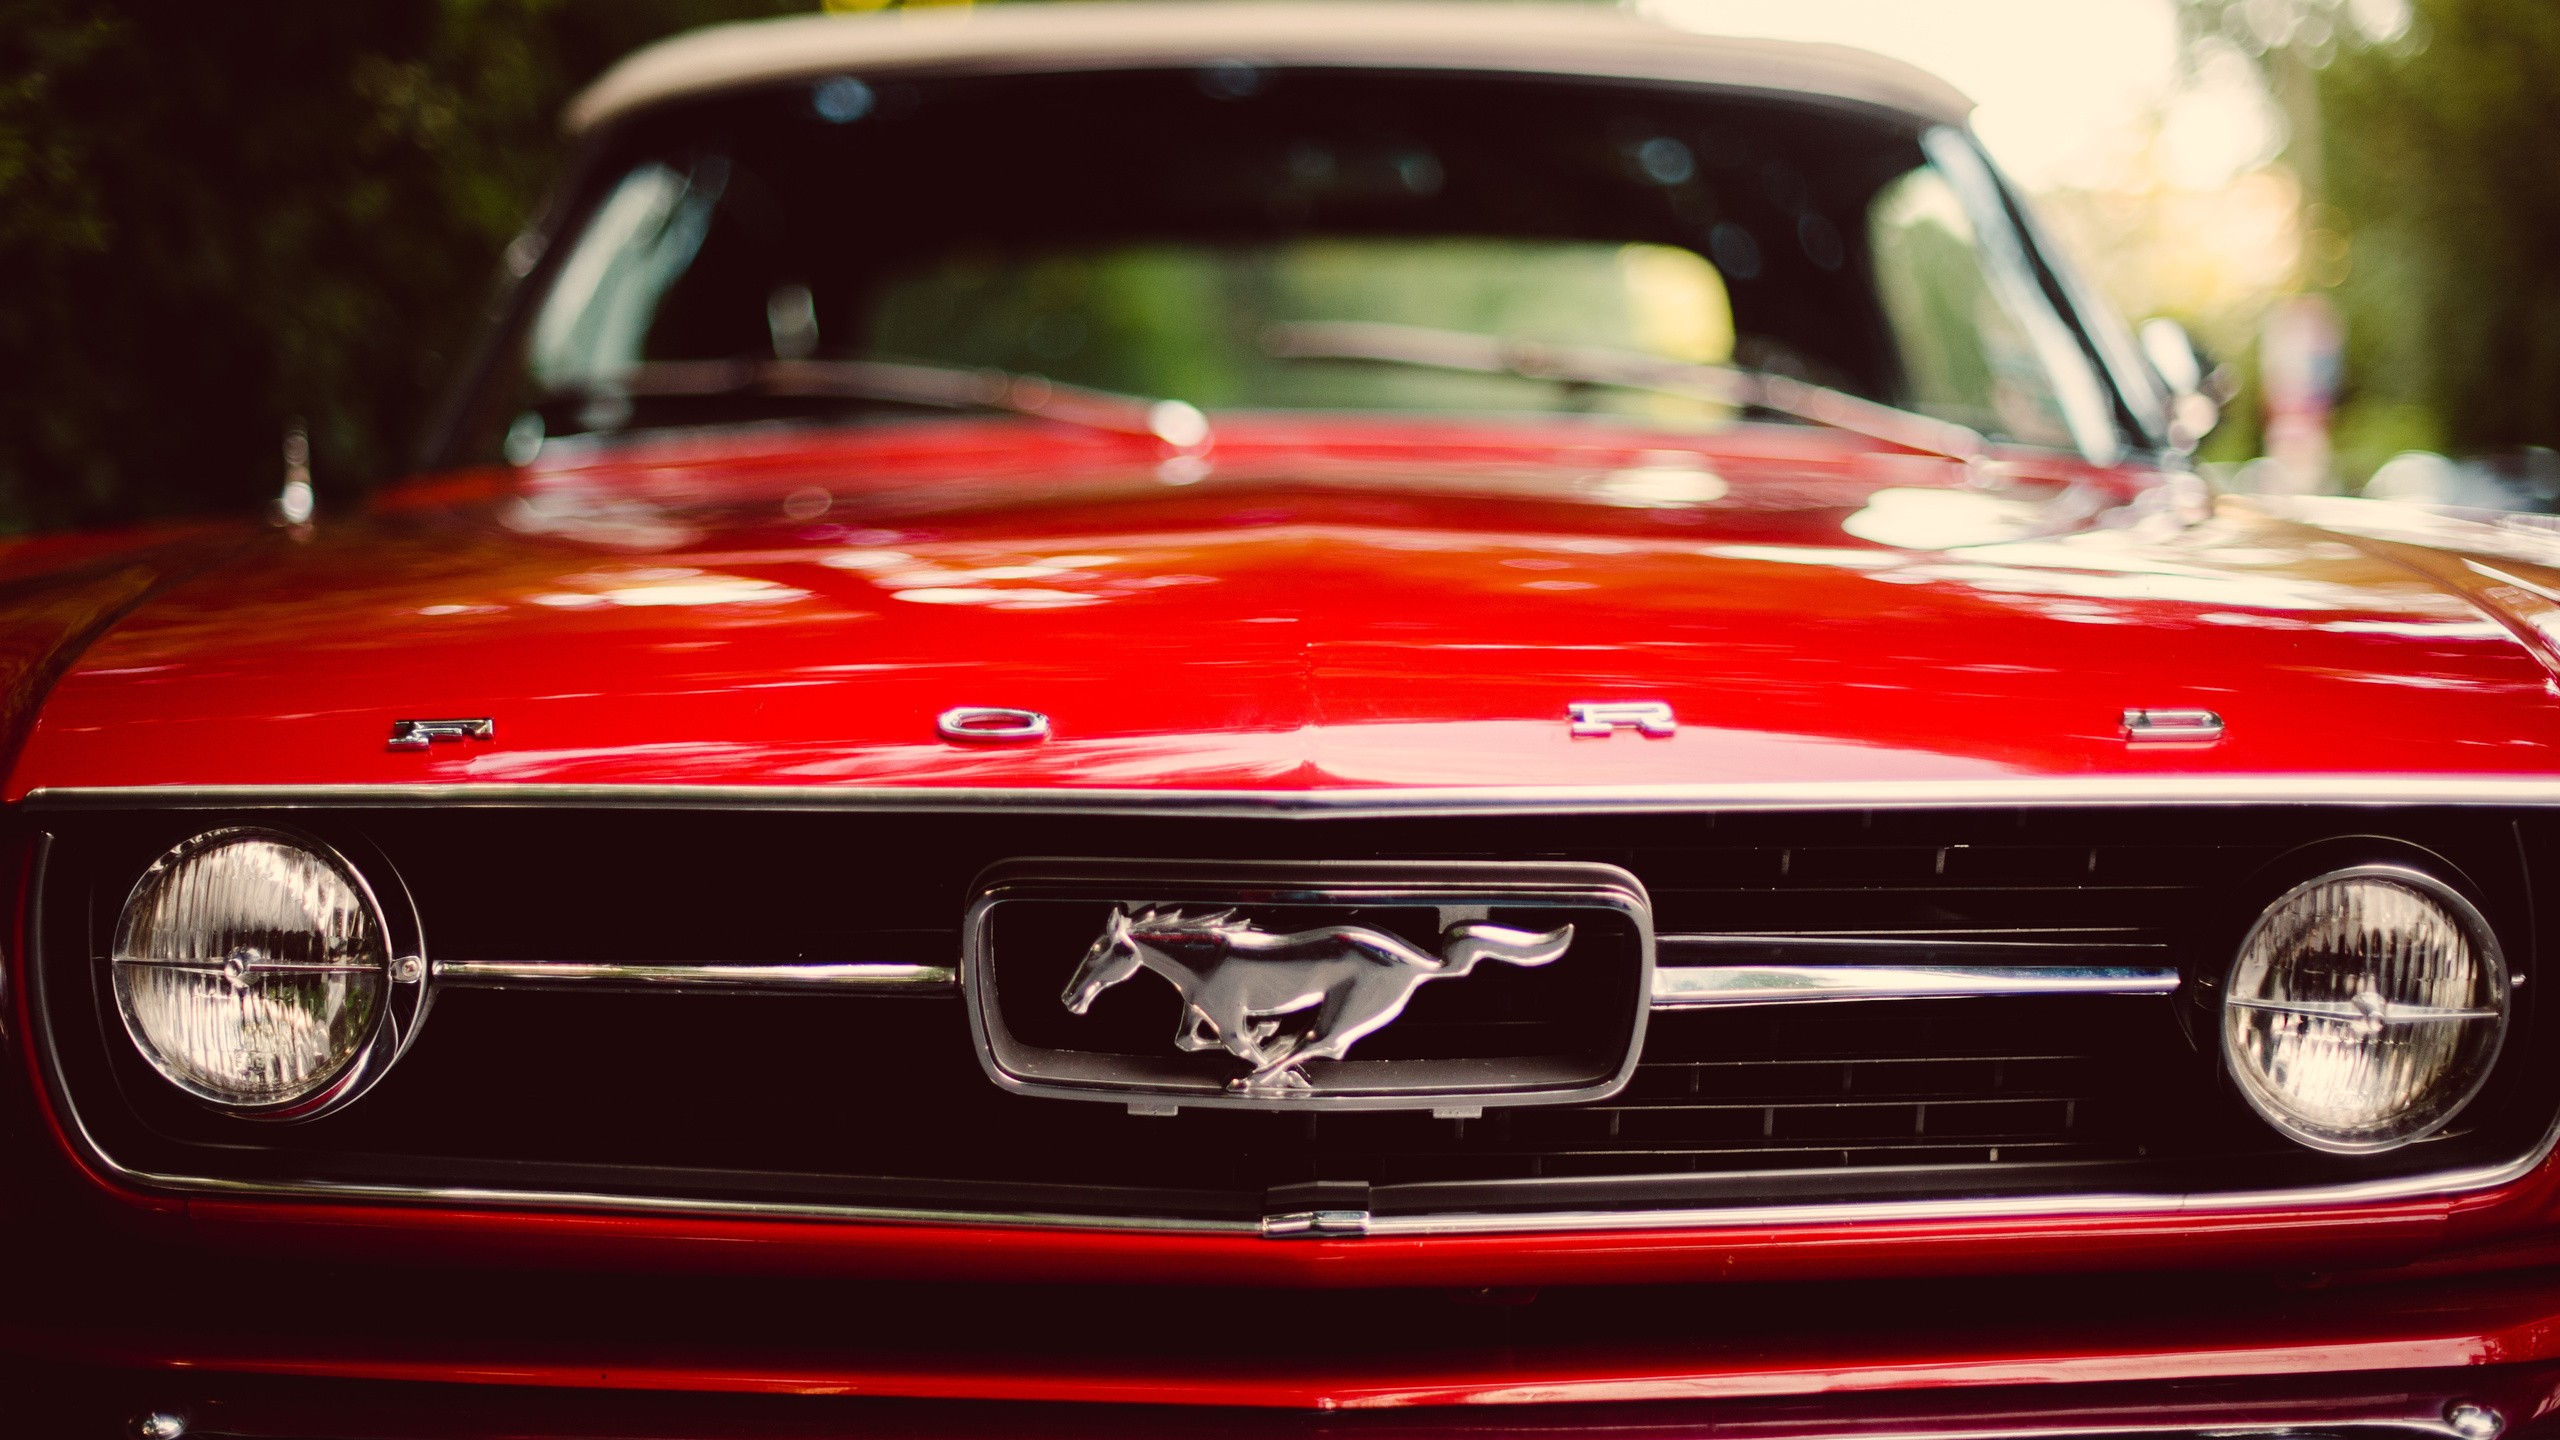 General 2560x1440 car depth of field headlights Ford Mustang classic car red cars